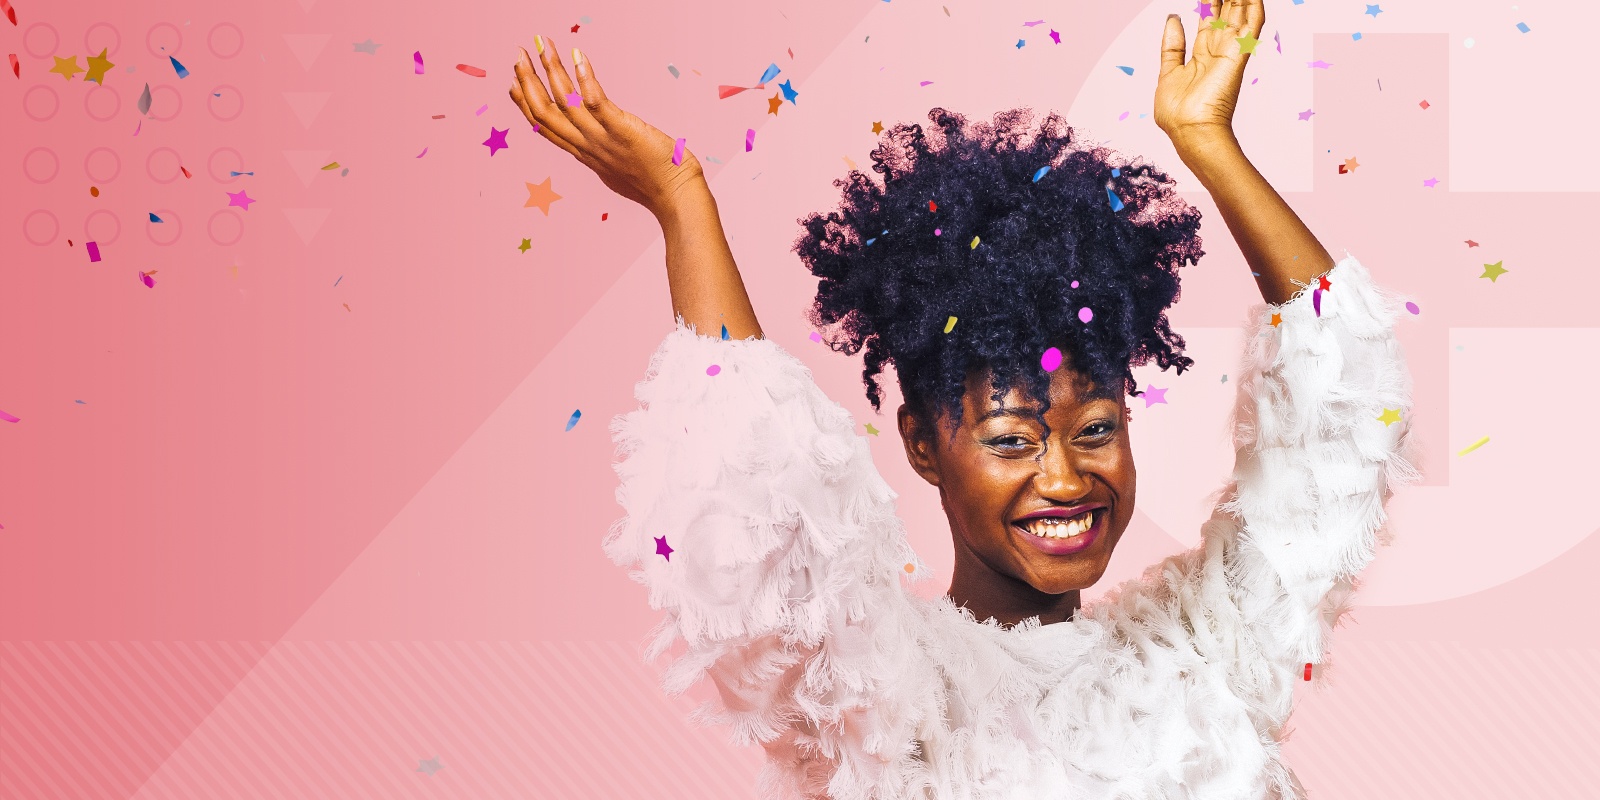 happy, smiling woman celebrating with arms up and throwing confetti